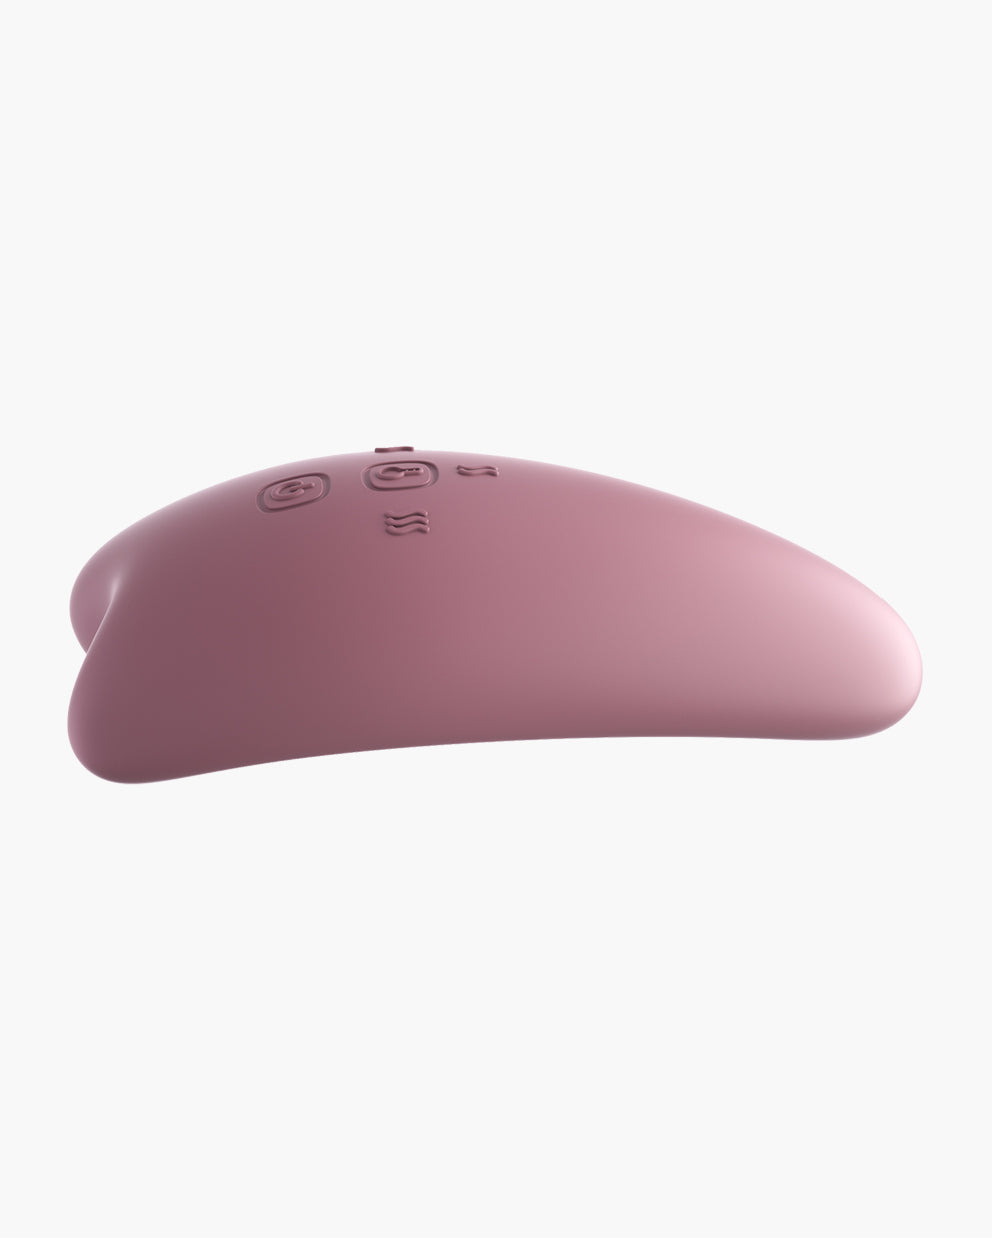 Double 2-in-1 Warming & Vibration Lactation Massager for Breastfeeding Moms